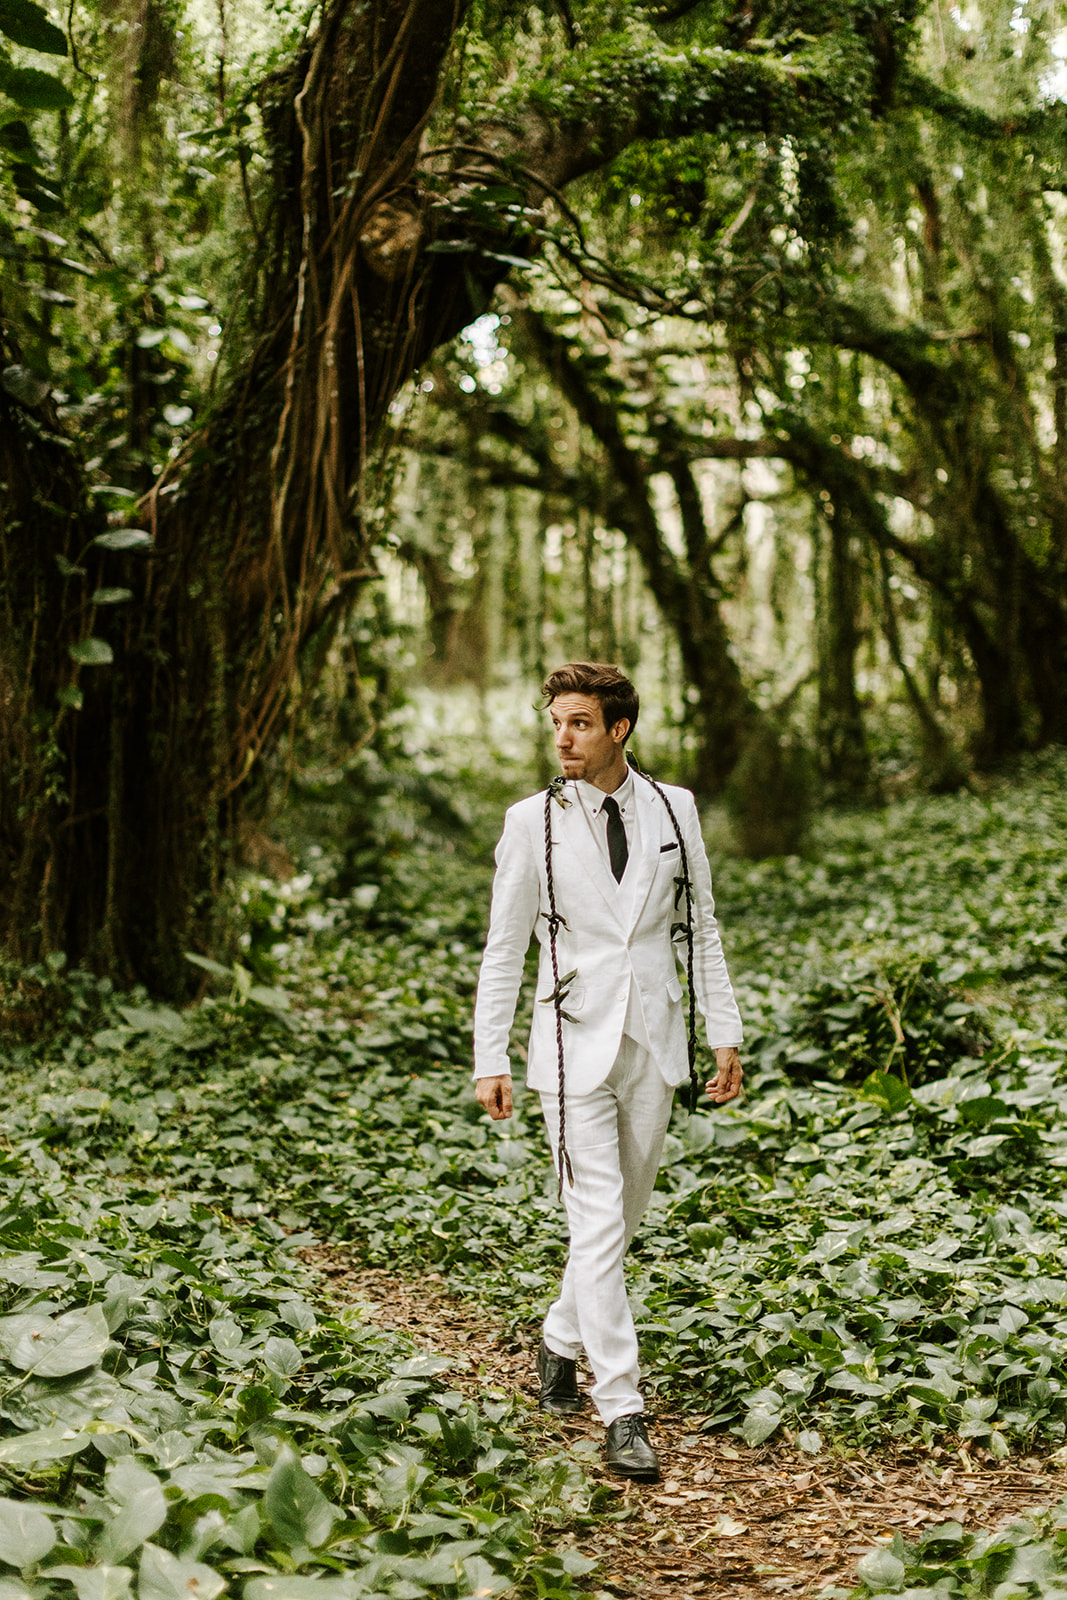 A couple who just got married celebrate their Maui elopement in a hawaii forest with lush greenery and jungle 